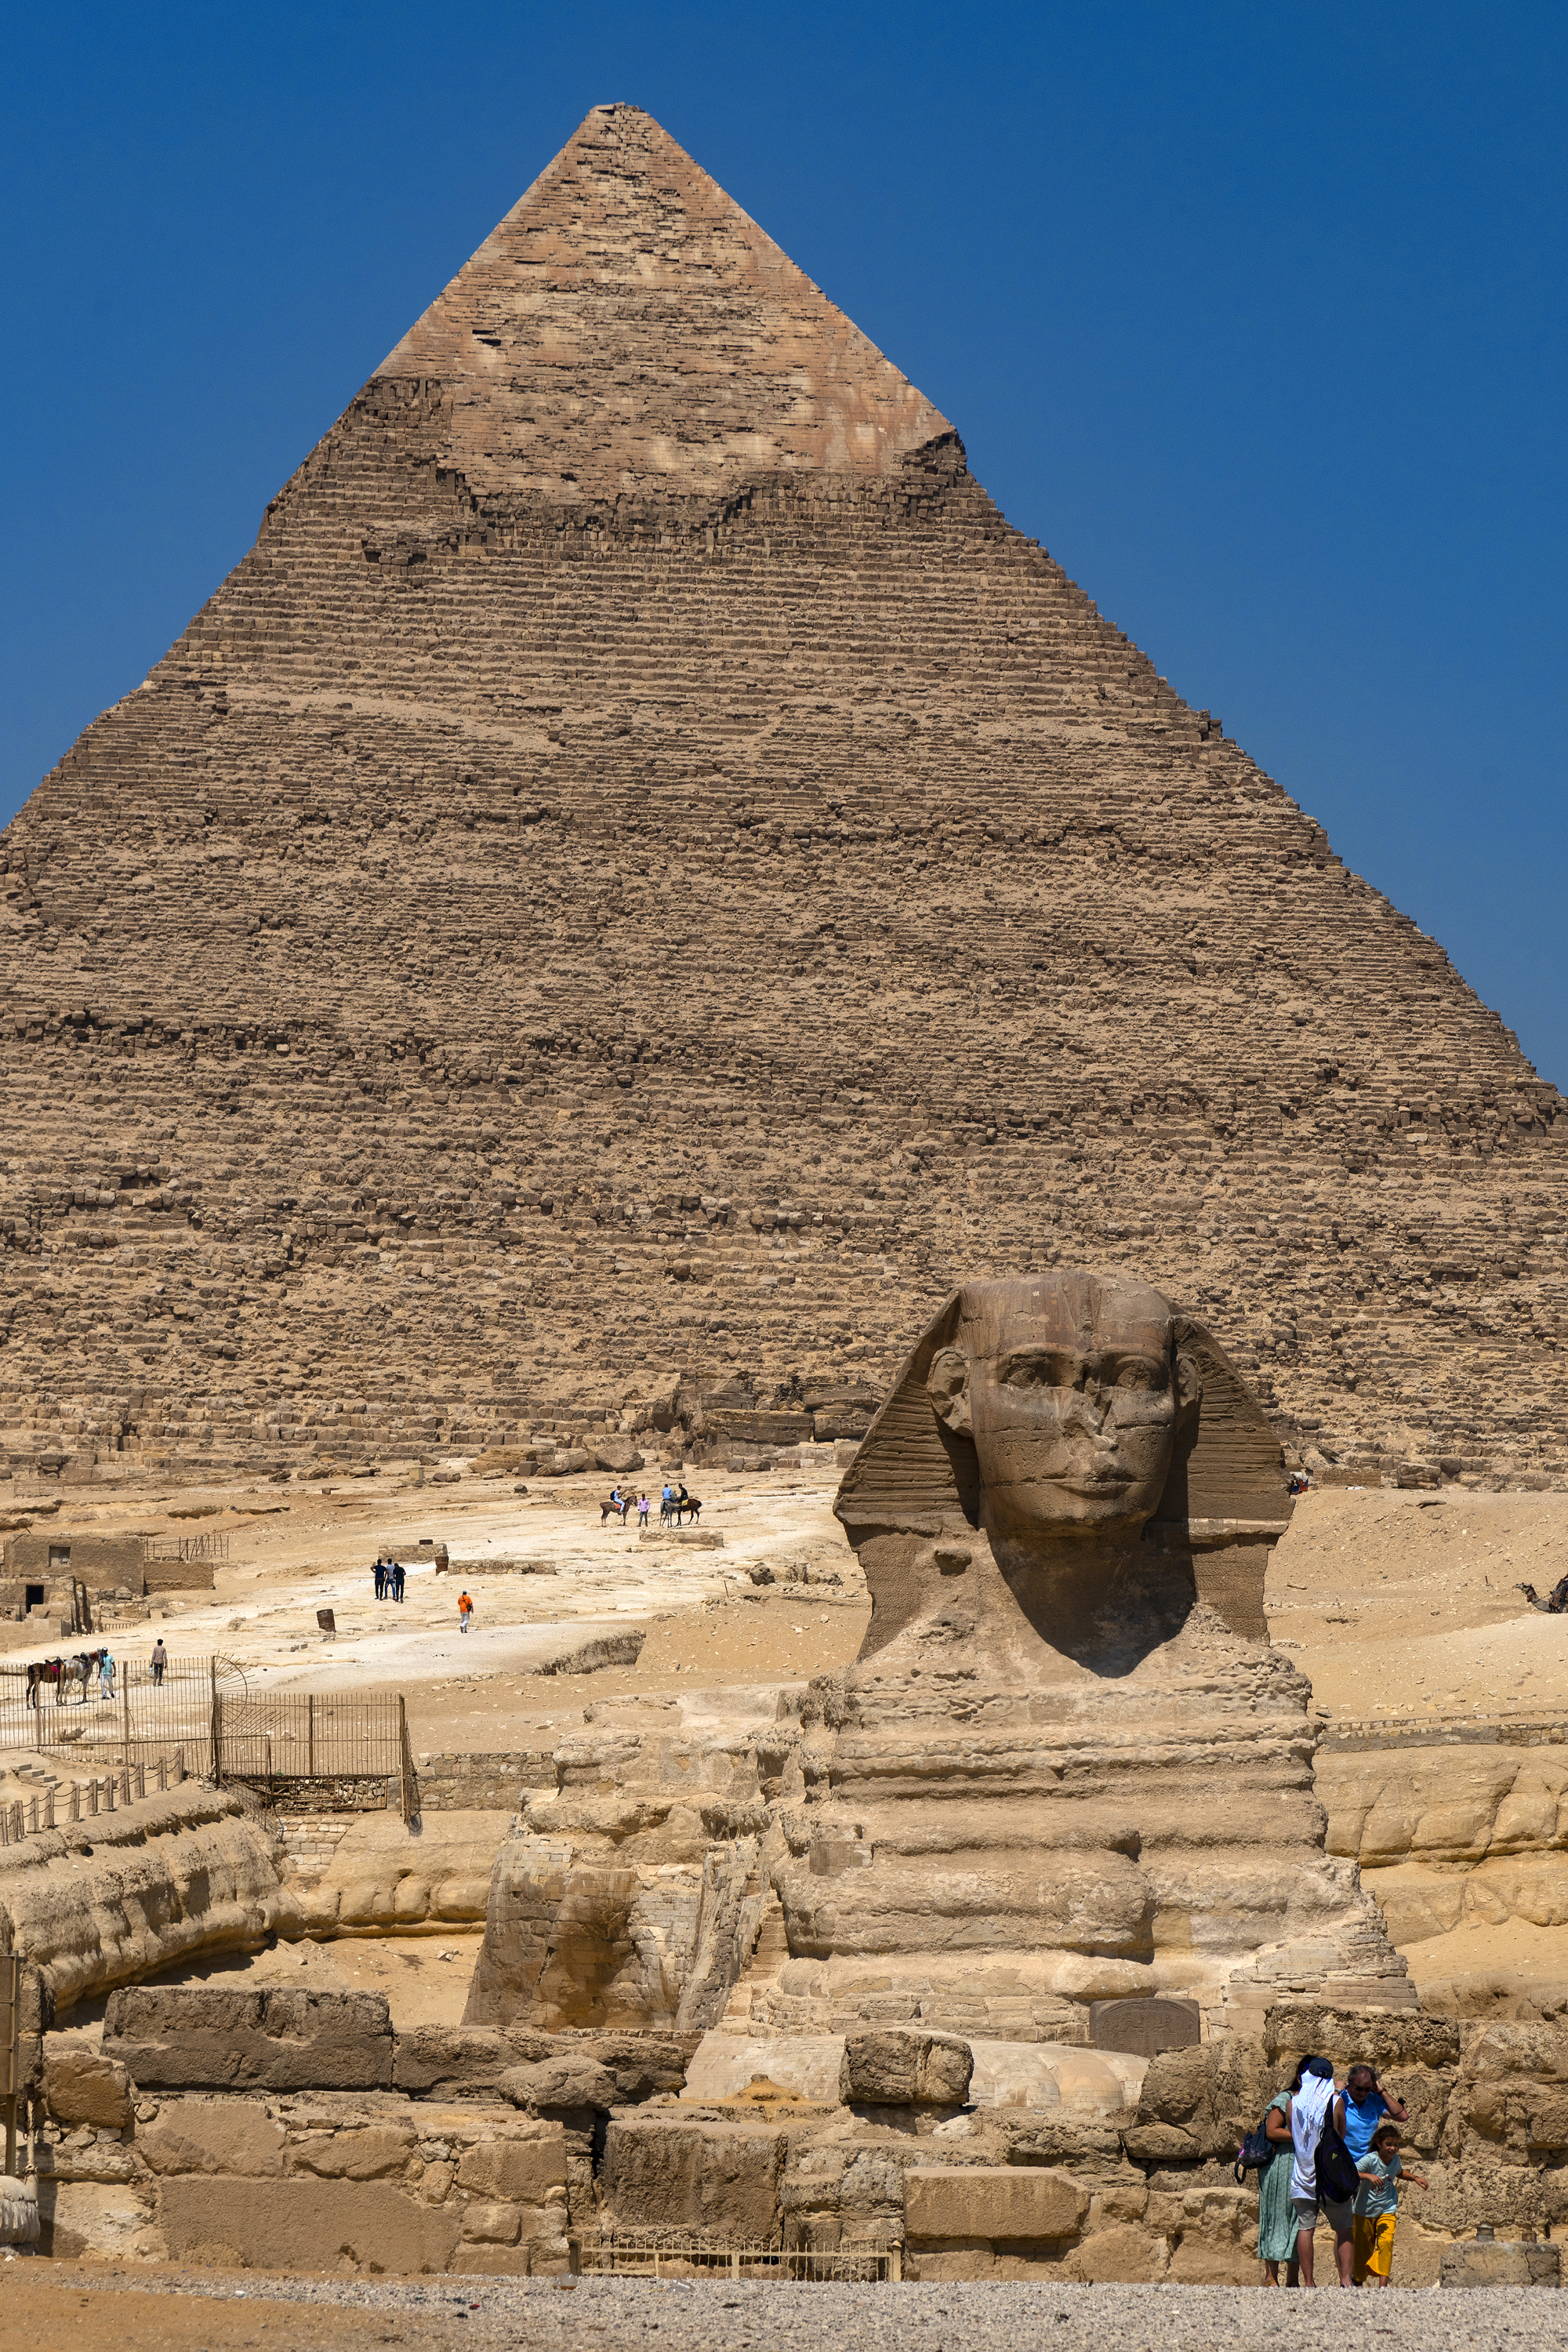 The Sphinx and the Great Pyramid at Giza Plateau. Photo by Scott Bennett